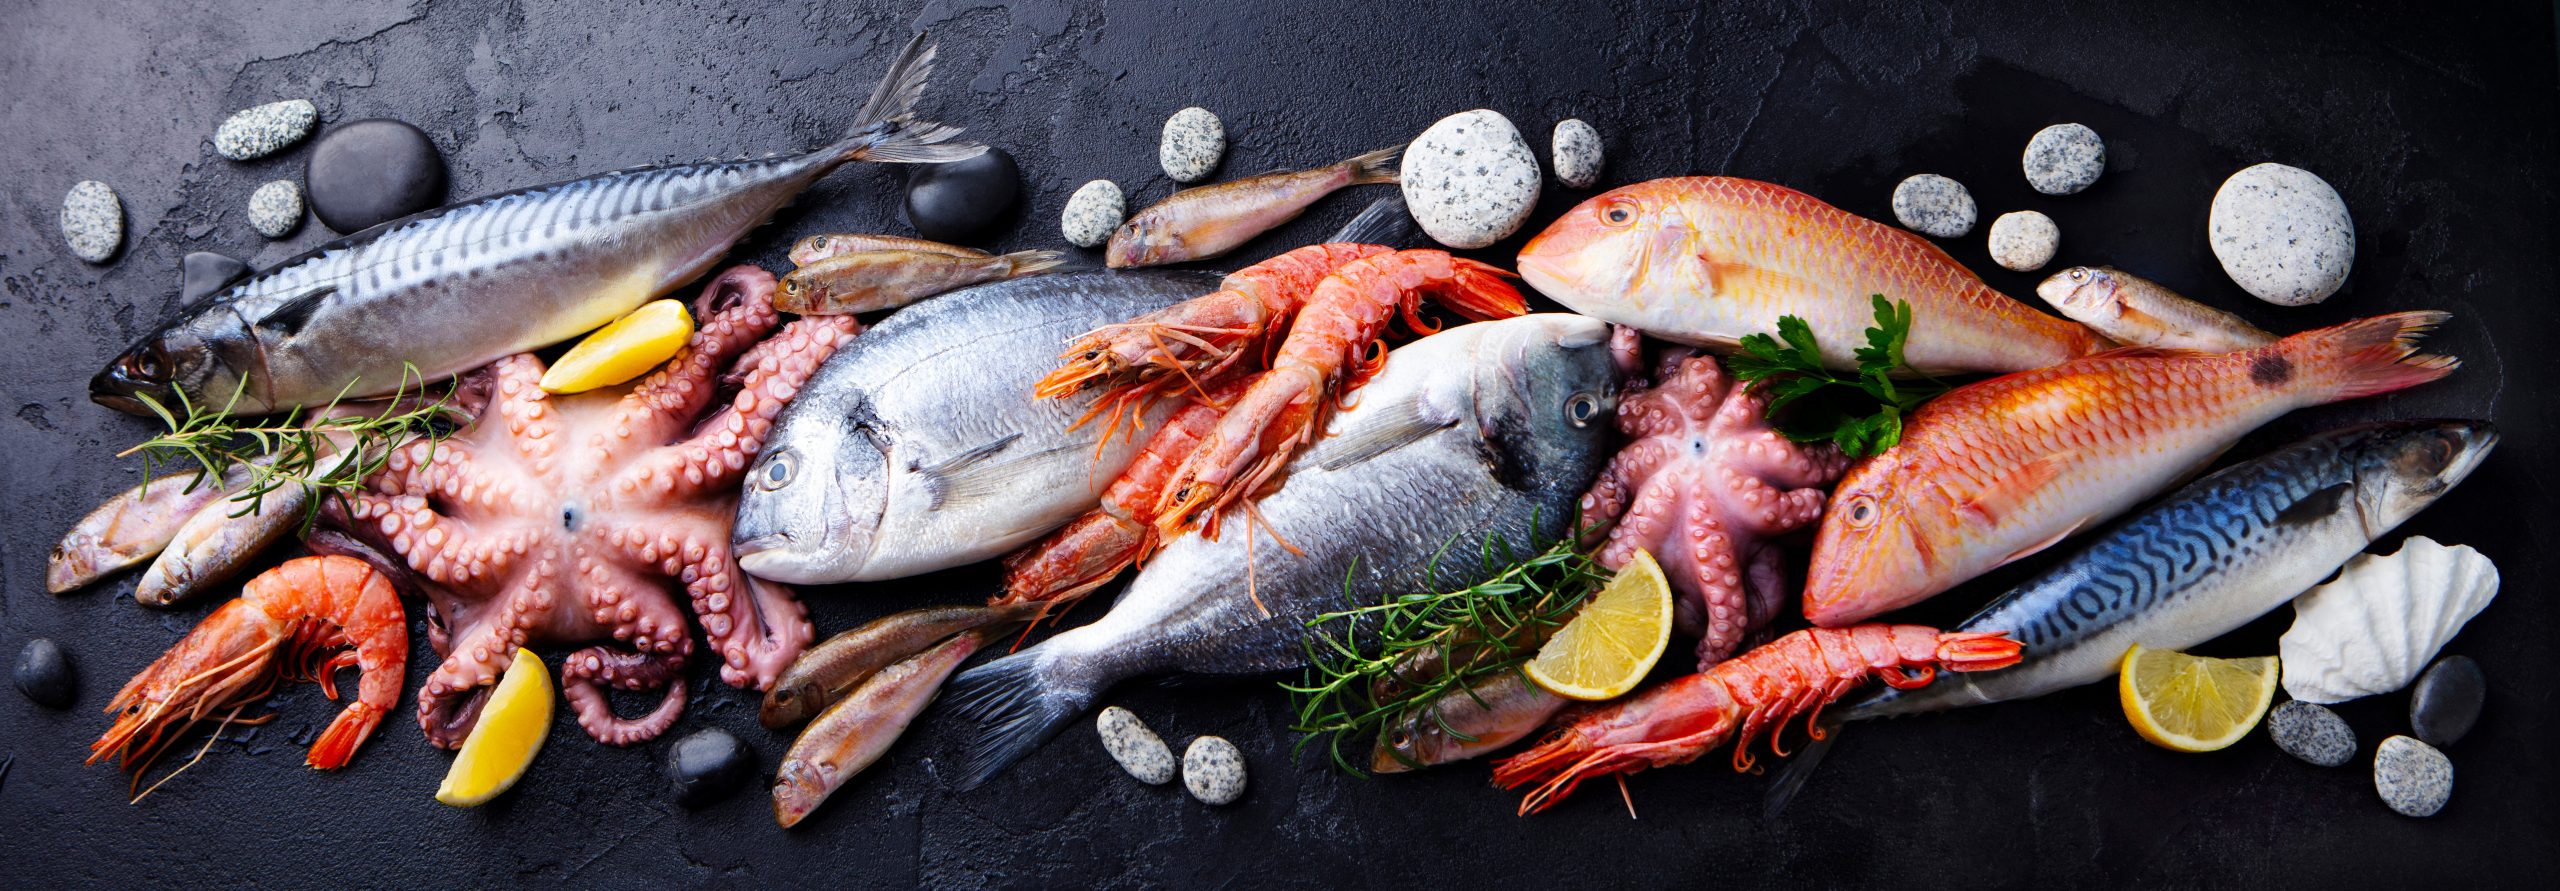 Fresh,Fish,And,Seafood,Assortment,On,Black,Slate,Background.,Top